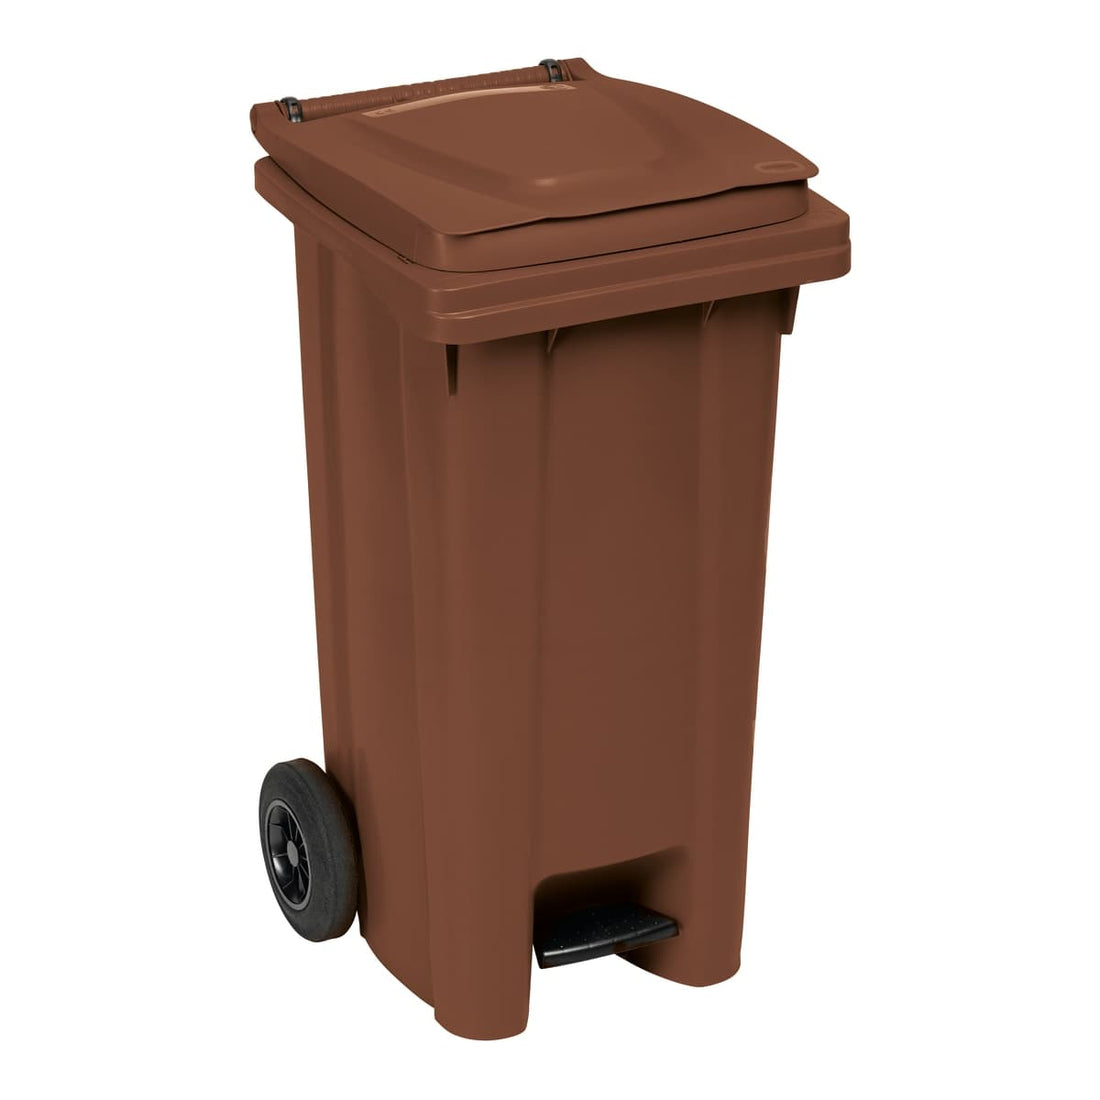 120LT WHEELED BIN WITH PEDAL BROWN EARTH - best price from Maltashopper.com BR410007619